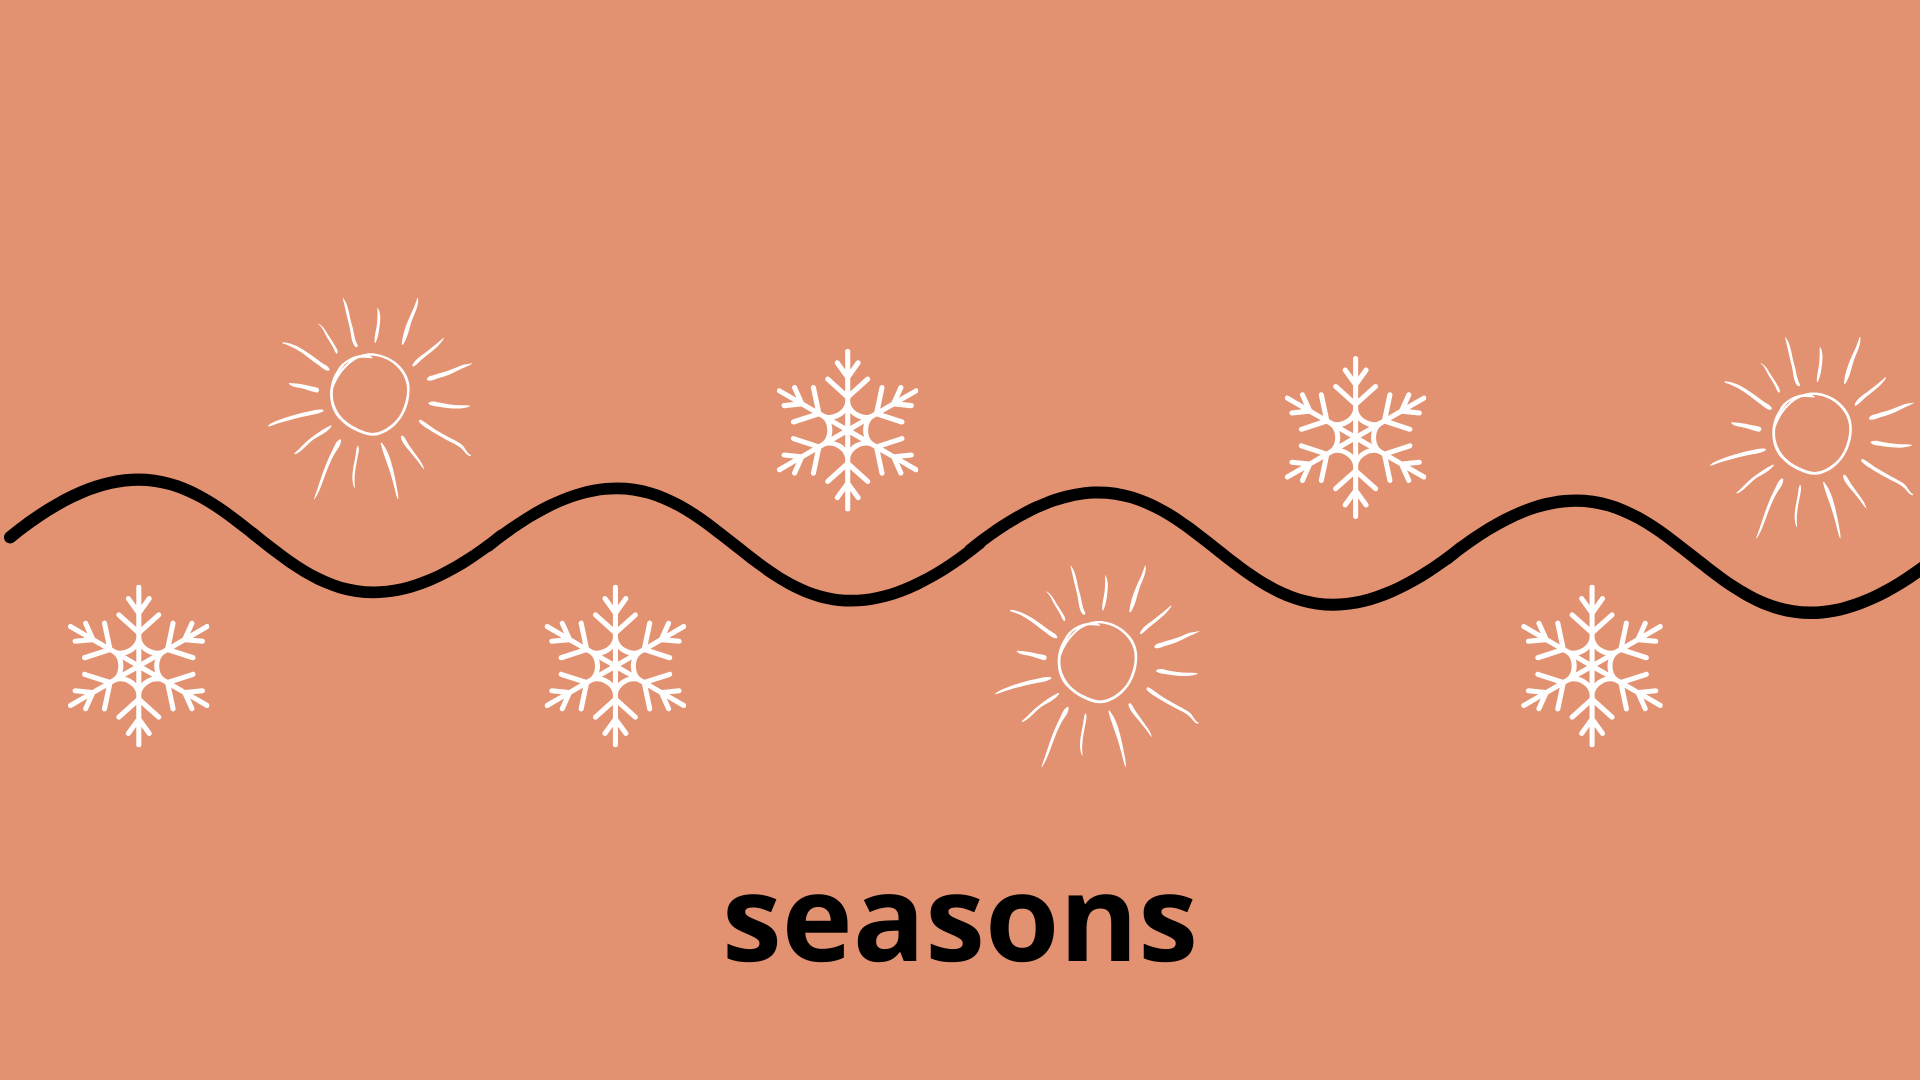 How to overcome seasonal fluctuations in demand on Amazon, Etsy, and Shopify